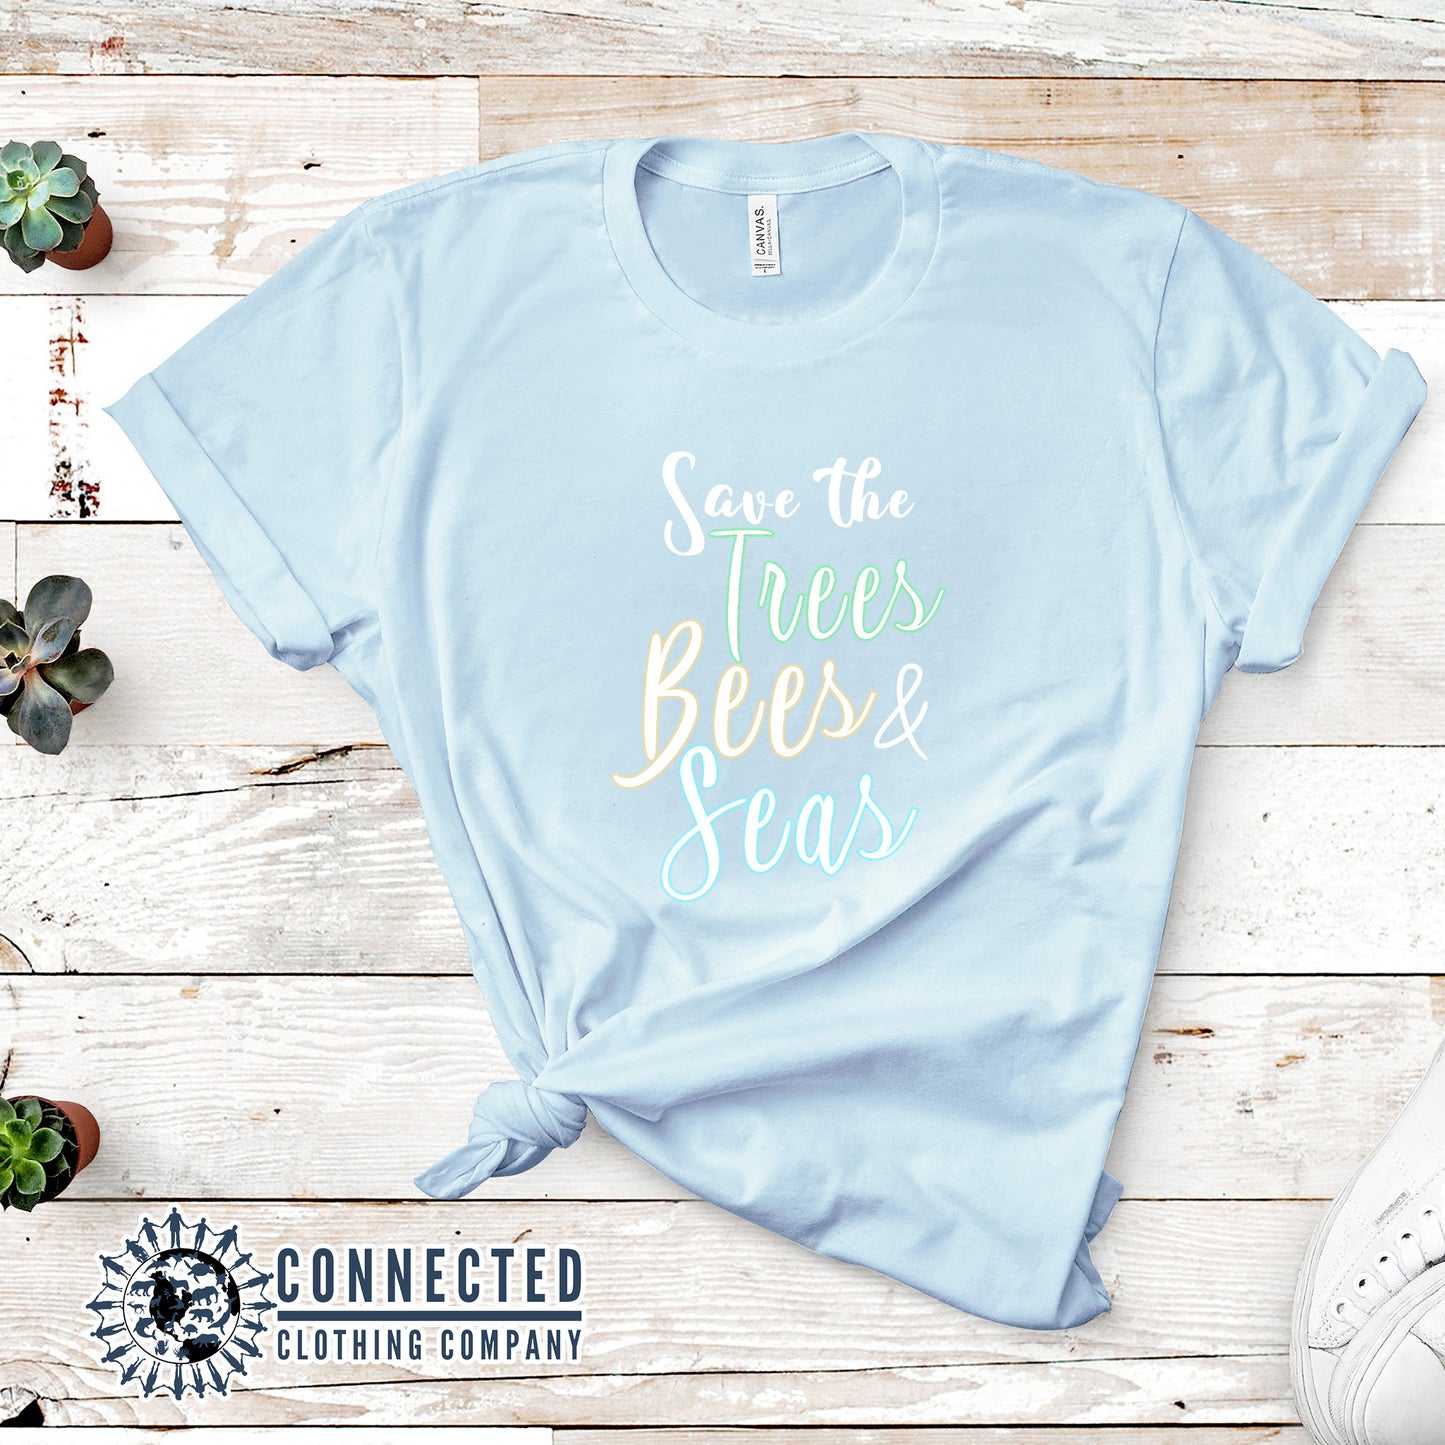 Light Blue Save The Trees Bees & Seas Short-Sleeve Tee - sweetsherriloudesigns - Ethically and Sustainably Made - 10% donated to ocean conservation